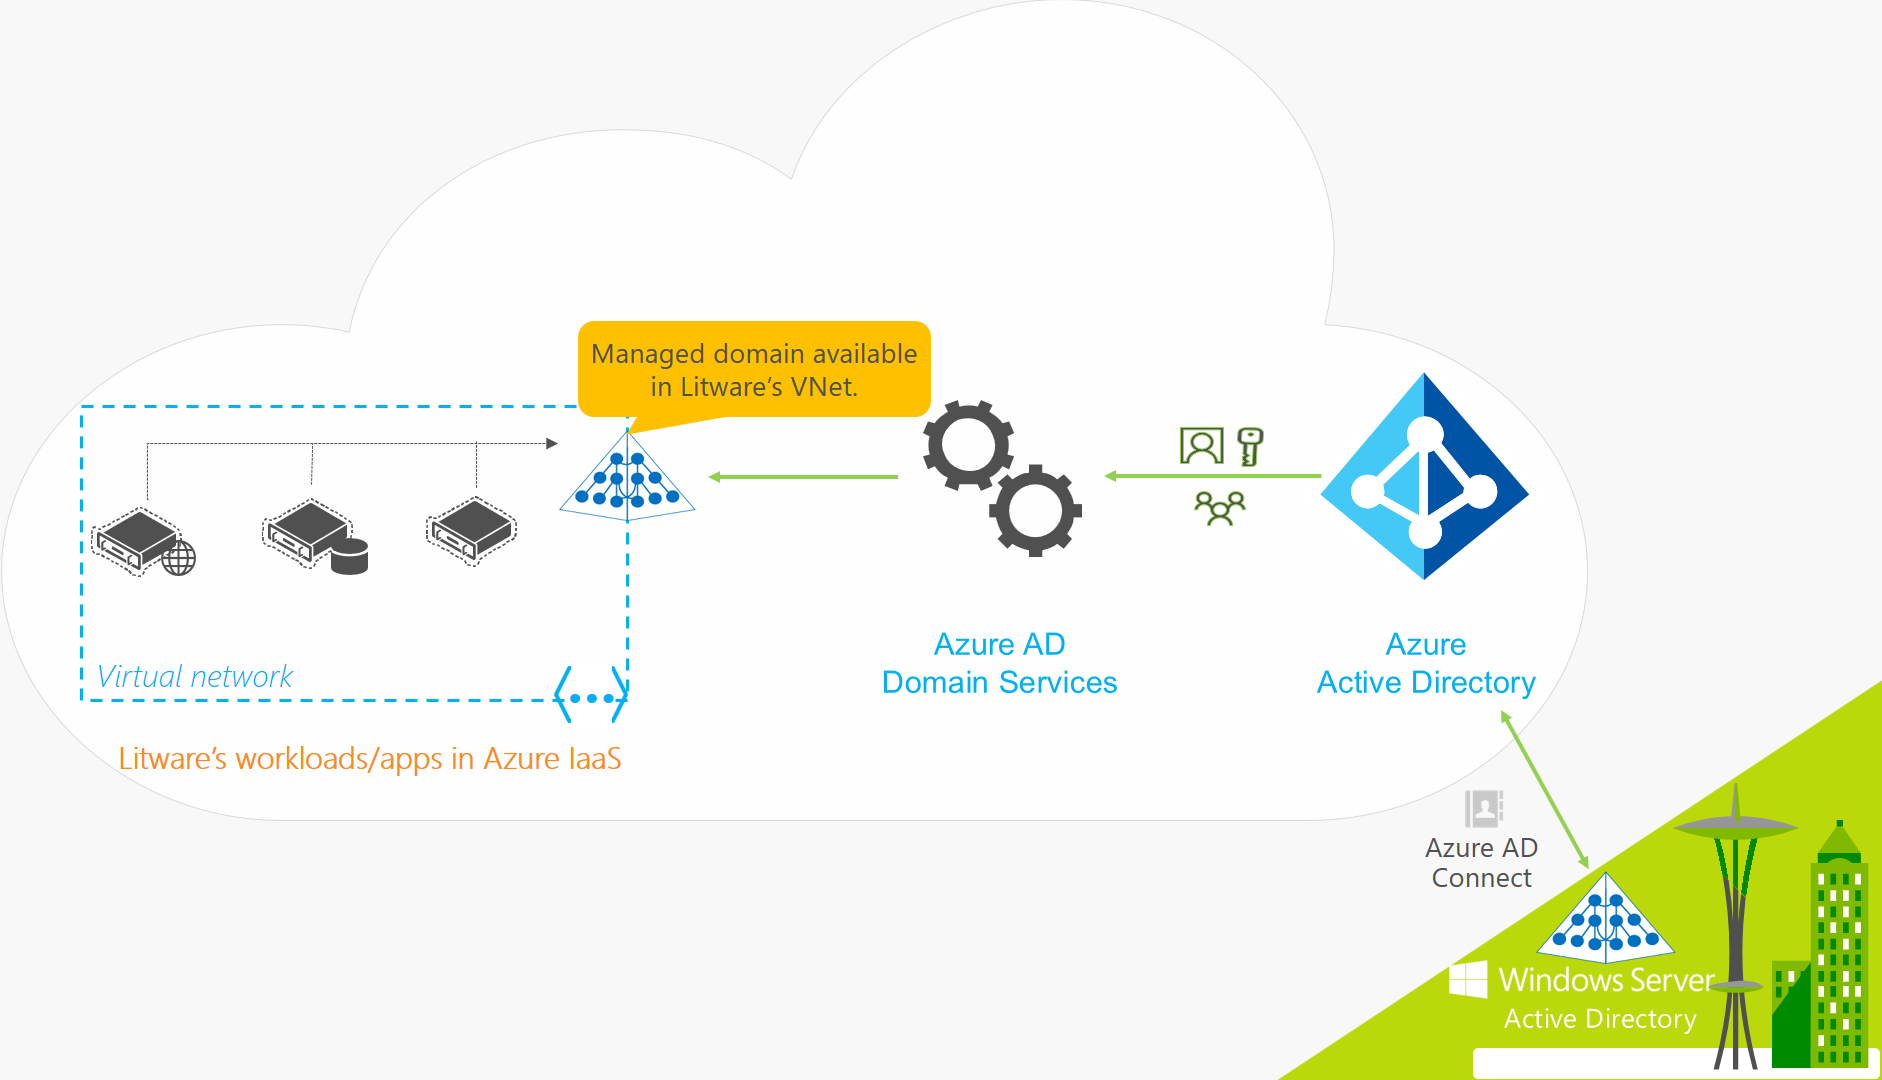 Microsoft Entra Domain Services for a hybrid organization that includes on-premises synchronization